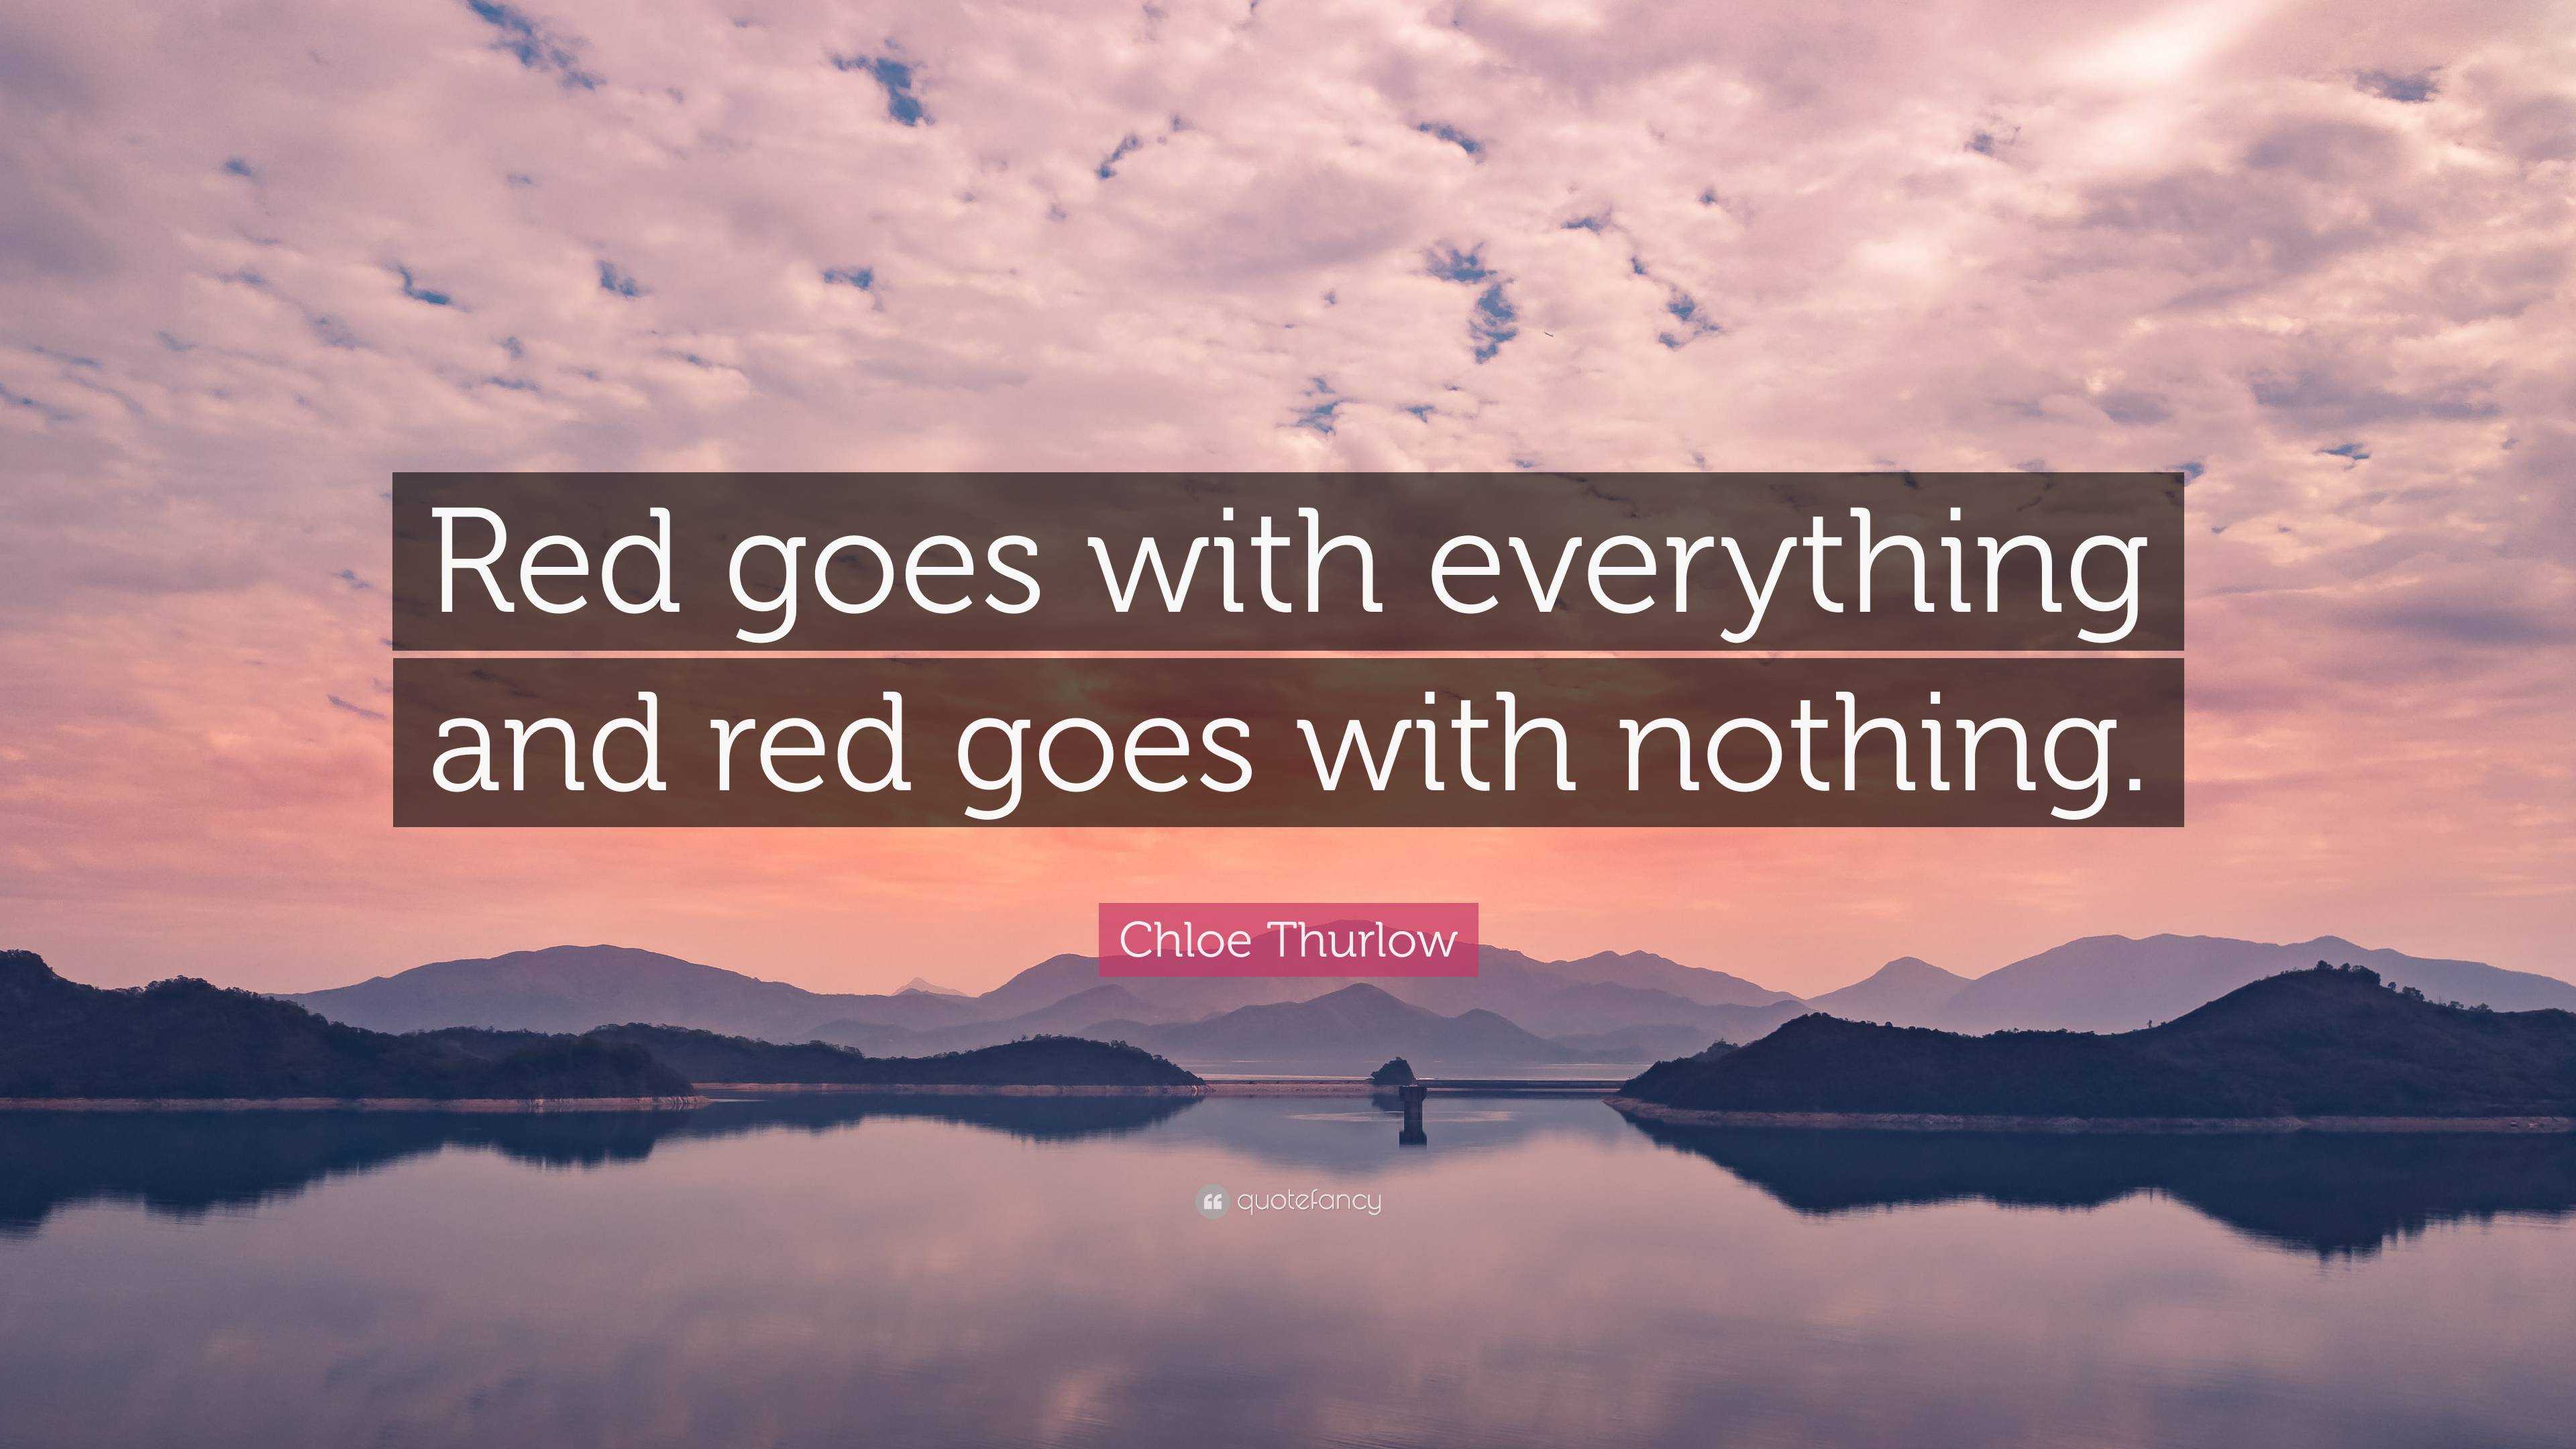 Chloe Thurlow Quote: “Red goes with everything red goes with nothing.”